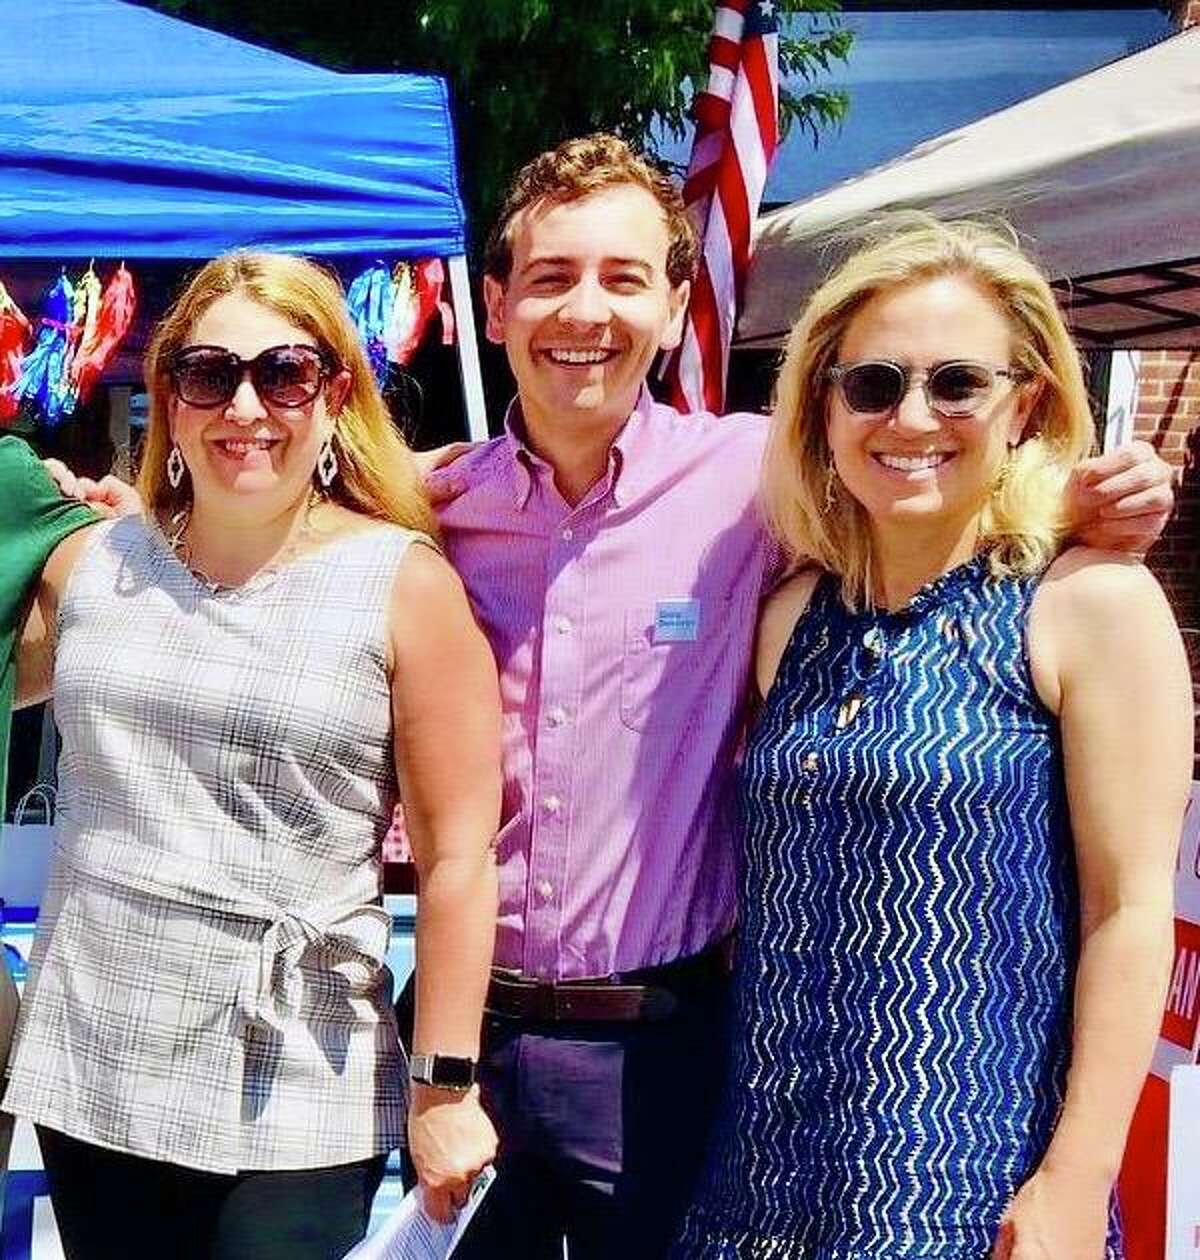 Democrats seeking new terms representing New Canaan in the state legislature will appear at both a meet and greet outside Town Hall and on a virtual barbecue between 3 and 5 p.m. Sunday, Sept. 13. From left are: State Rep. Lucy Dathan (142nd District: Norwalk and New Canaan), state Sen. Will Haskell (26th District: New Canaan, Bethel, Redding, Ridgefield, Weston, Wesport and Wilton) and state Sen. Alex Kasser (36th District: Greenwich, New Canaan and Stamford) who will all be outside Town Hall, 77 Main St. Masks are required. There is no charge to attend.